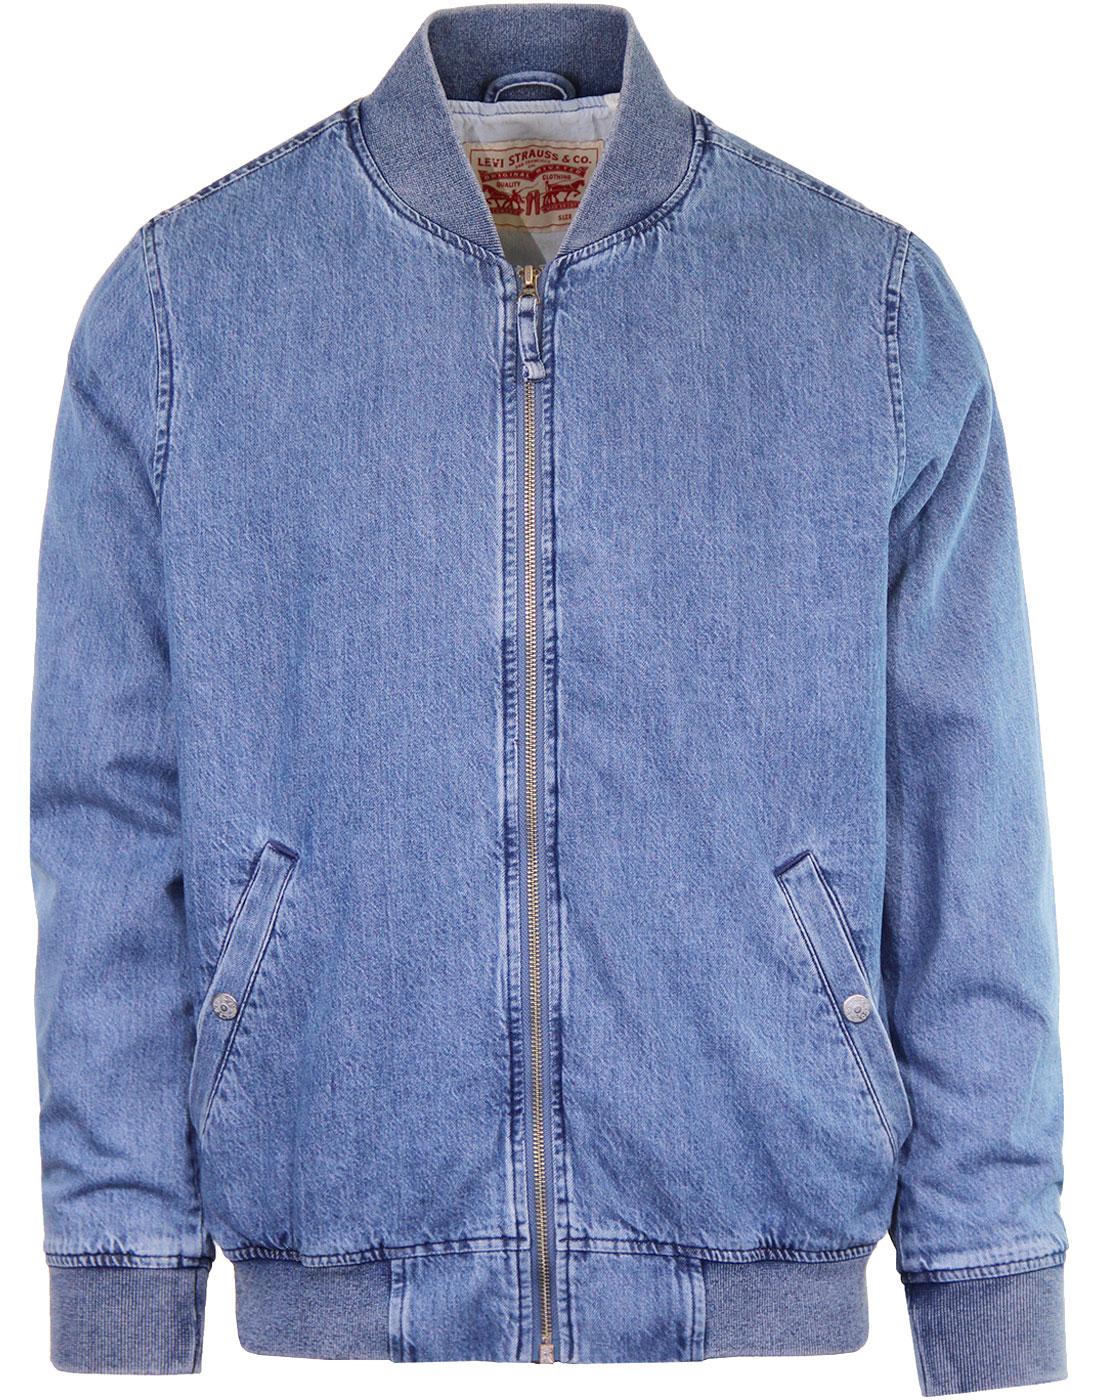 An event foul root denim bomber jacket alarm T board